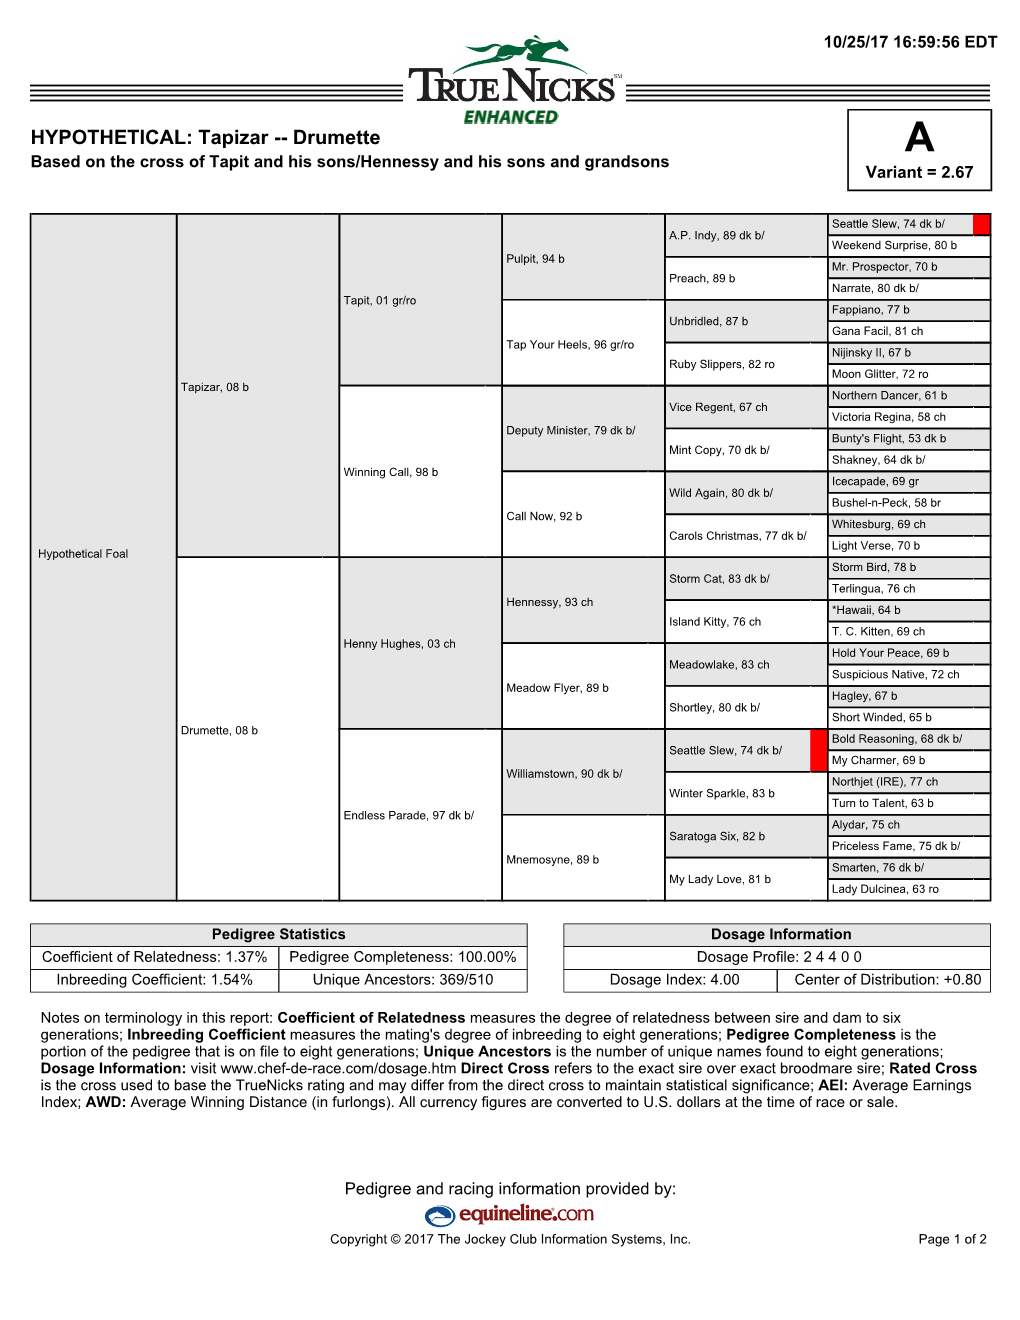 Tapizar -- Drumette a Based on the Cross of Tapit and His Sons/Hennessy and His Sons and Grandsons Variant = 2.67